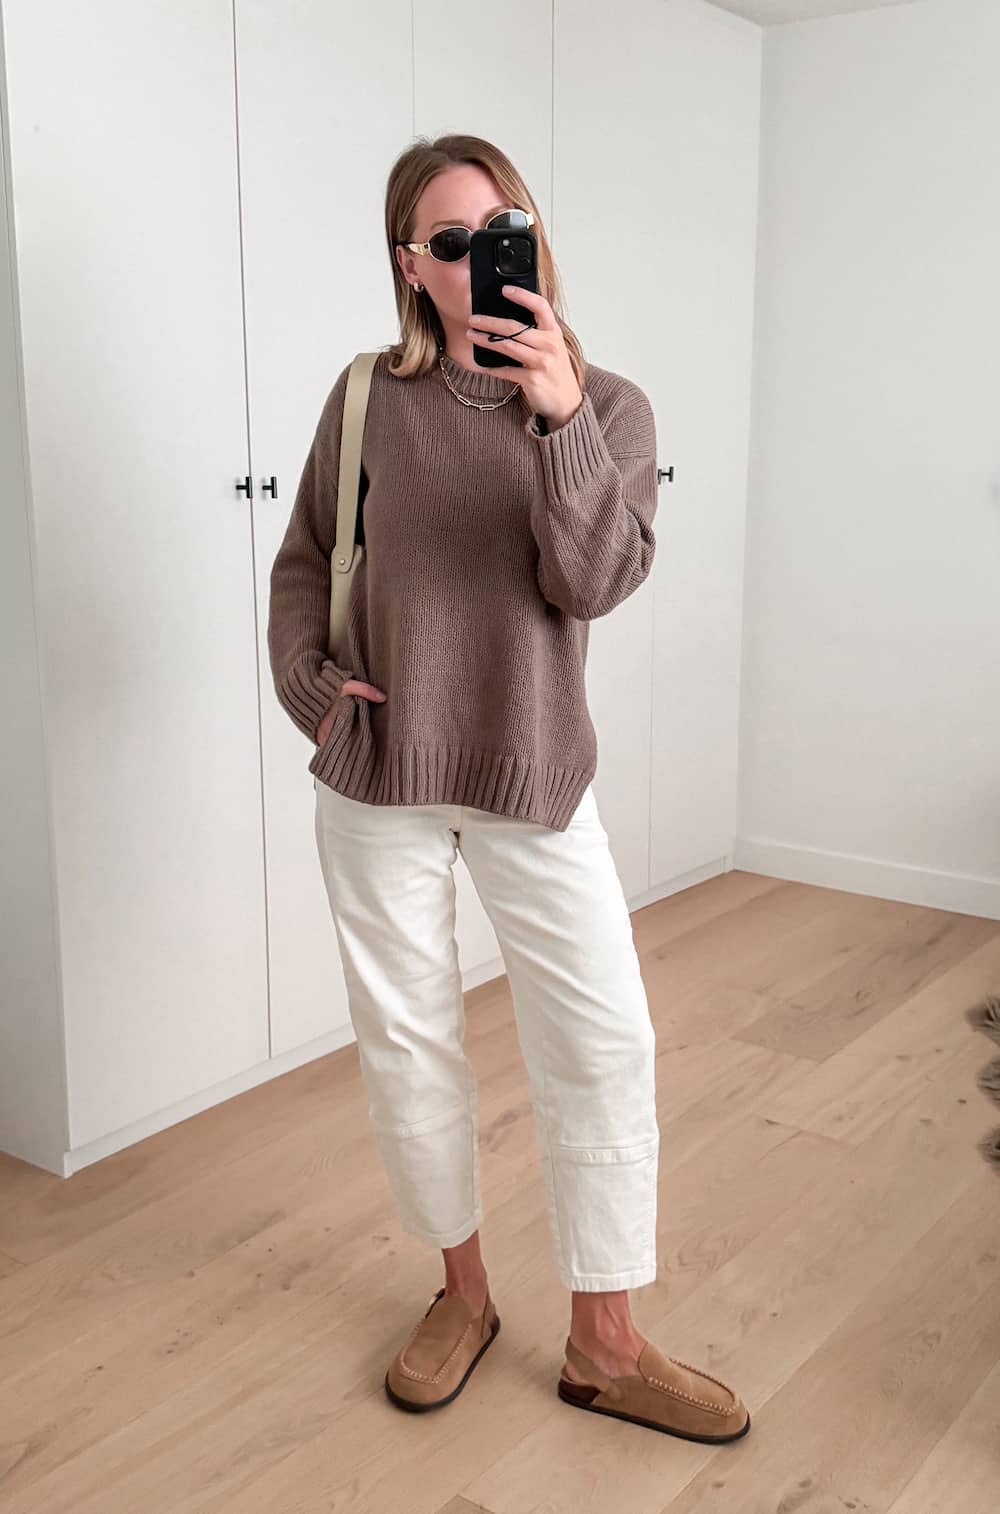 Christal wearing white cargo pants, a mauve sweater and Ugg flats.